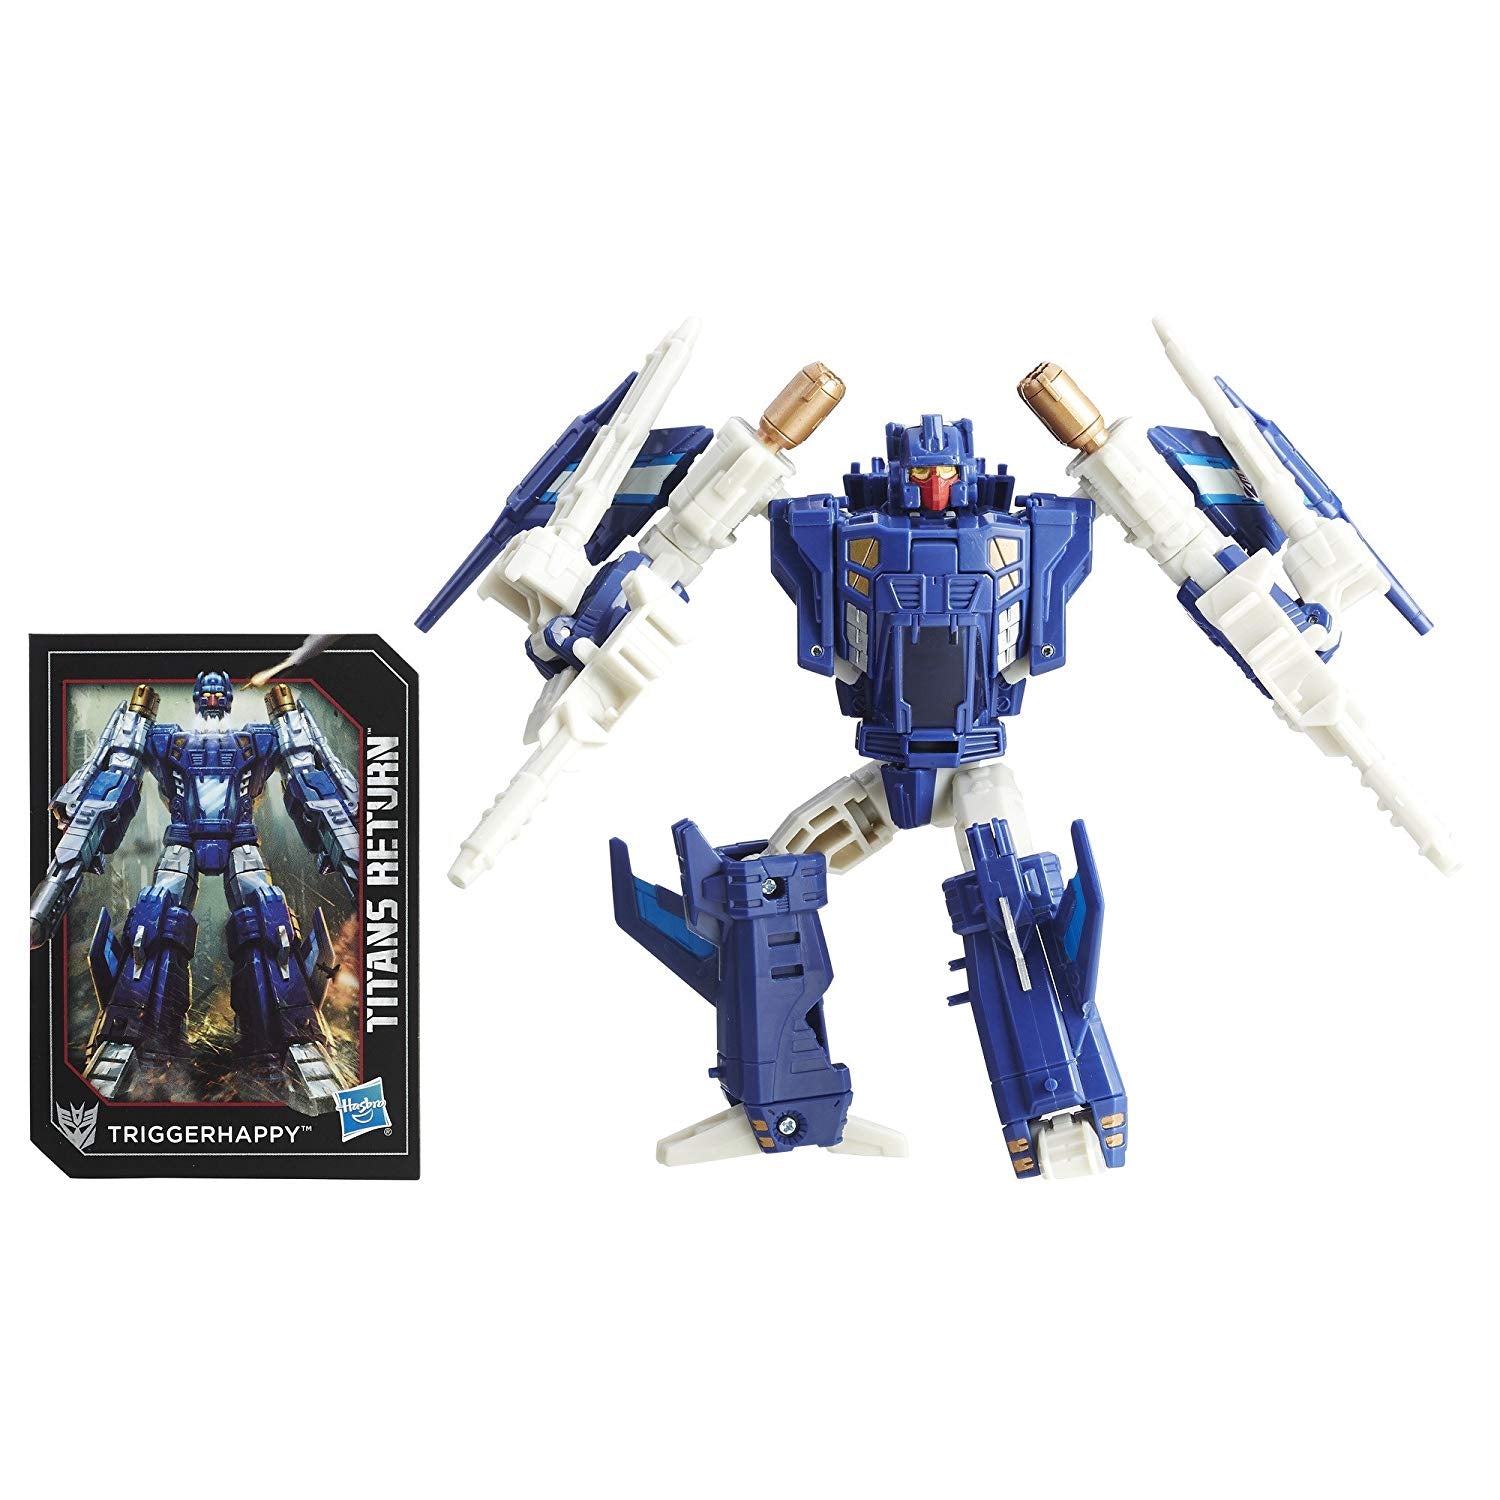 Transformers Generations Titans Return Deluxe Class Triggerhappy and Blowpipe Figure